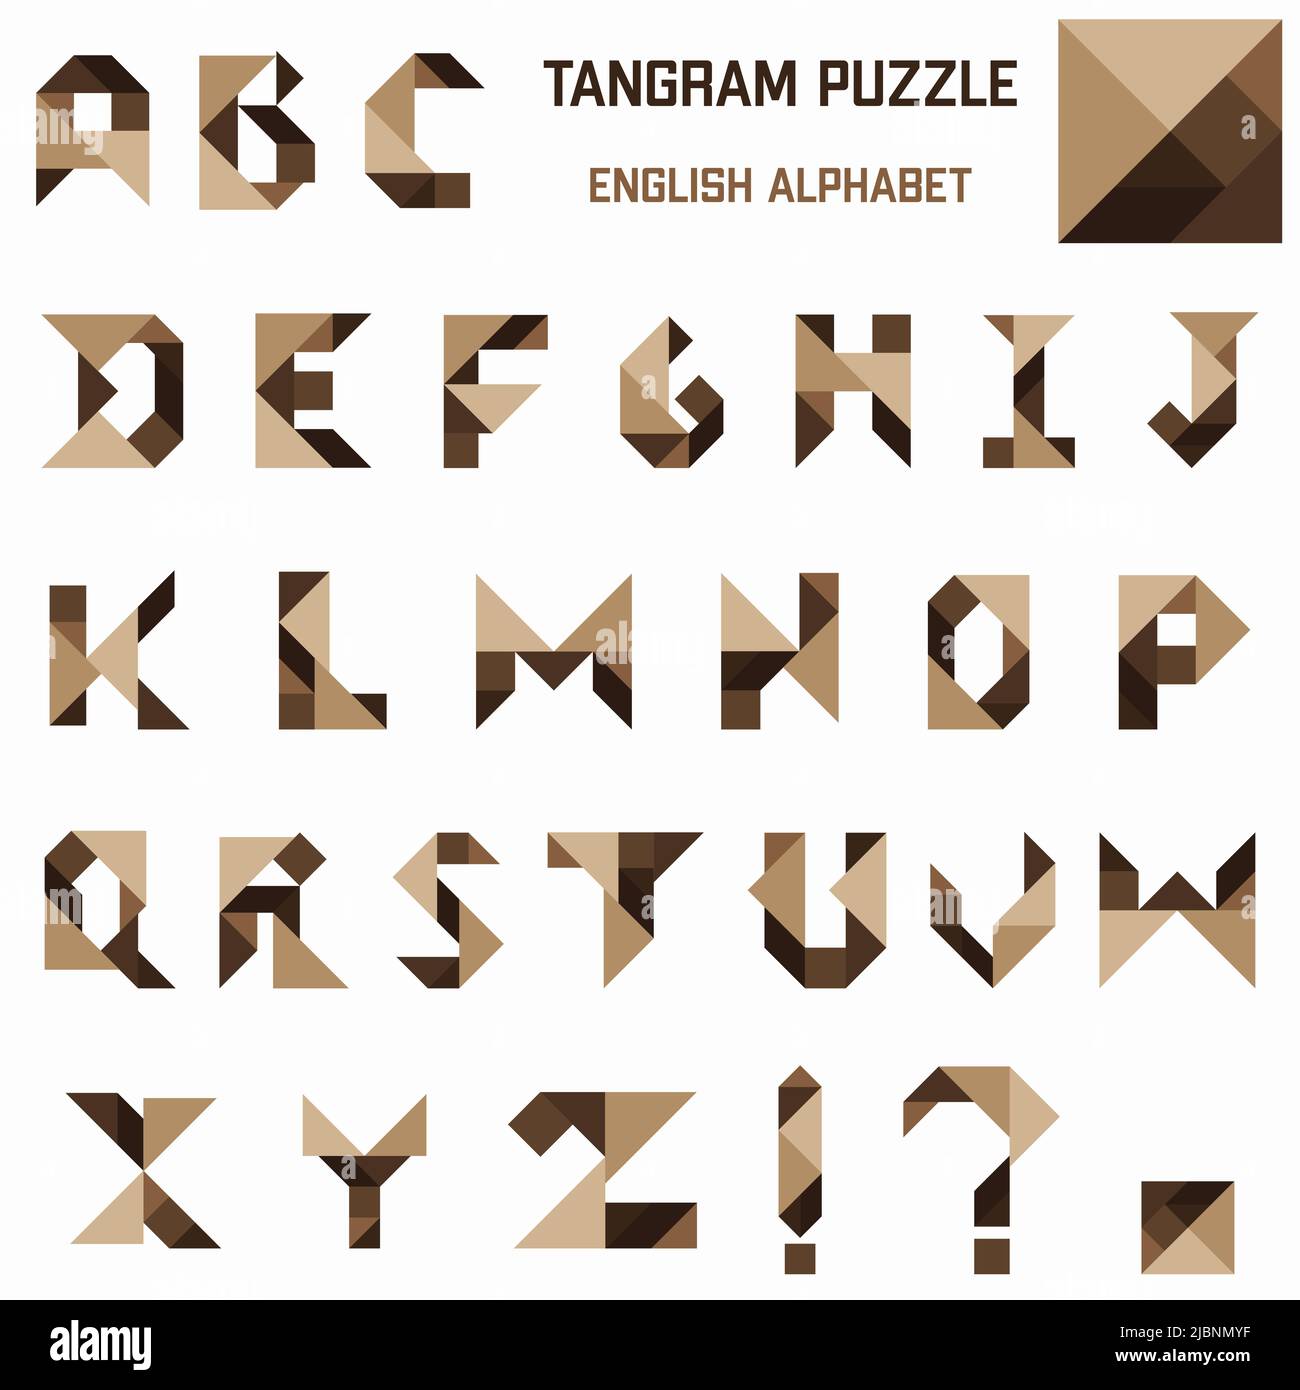 Tangram puzzle game. Set with english alphabet. Stock Vector